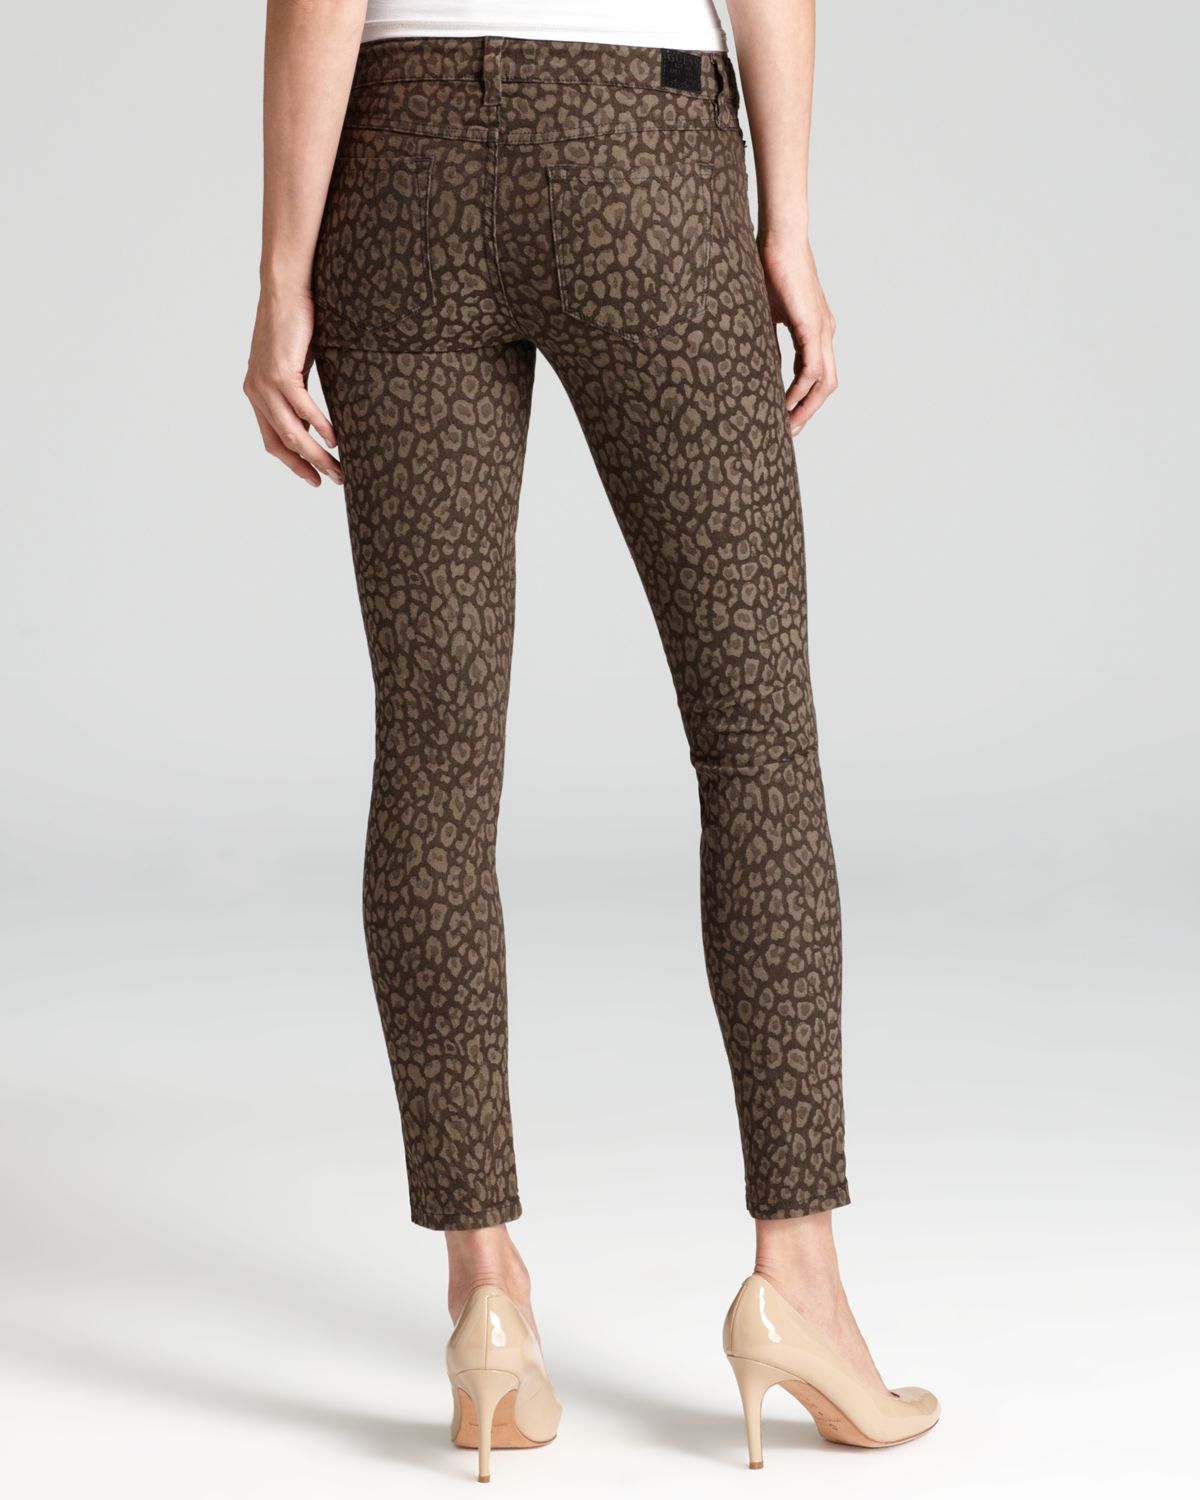 Lyst - Guess Jeans Brittney Skinny Leopard Print in Brown